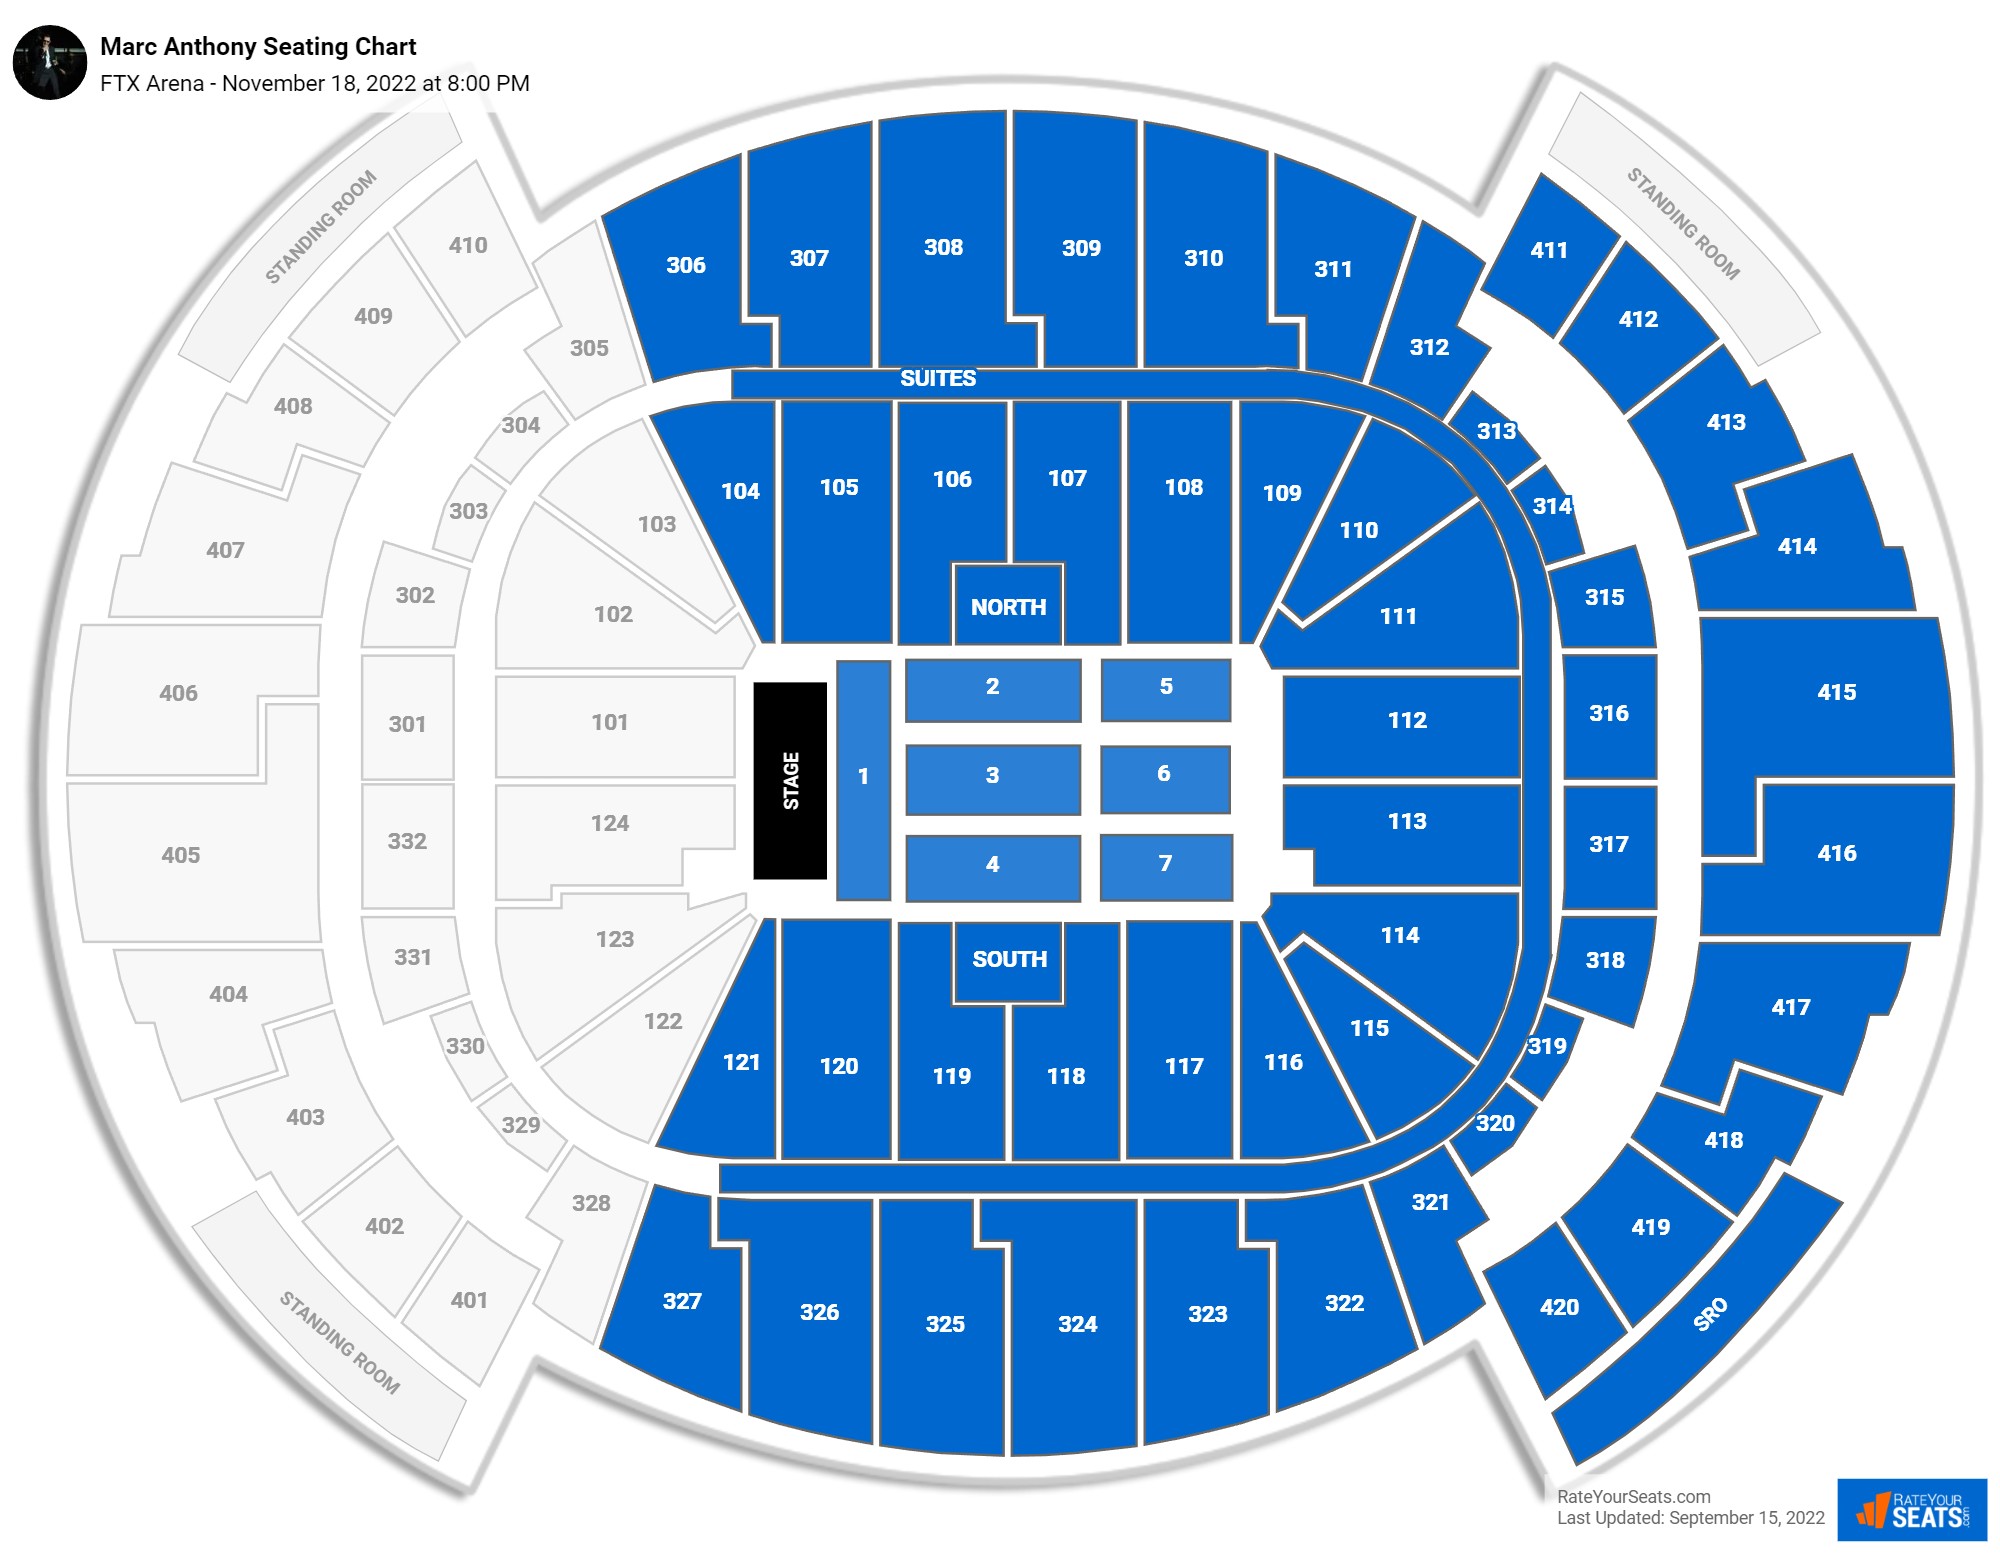 FTX Arena Concert Seating Chart